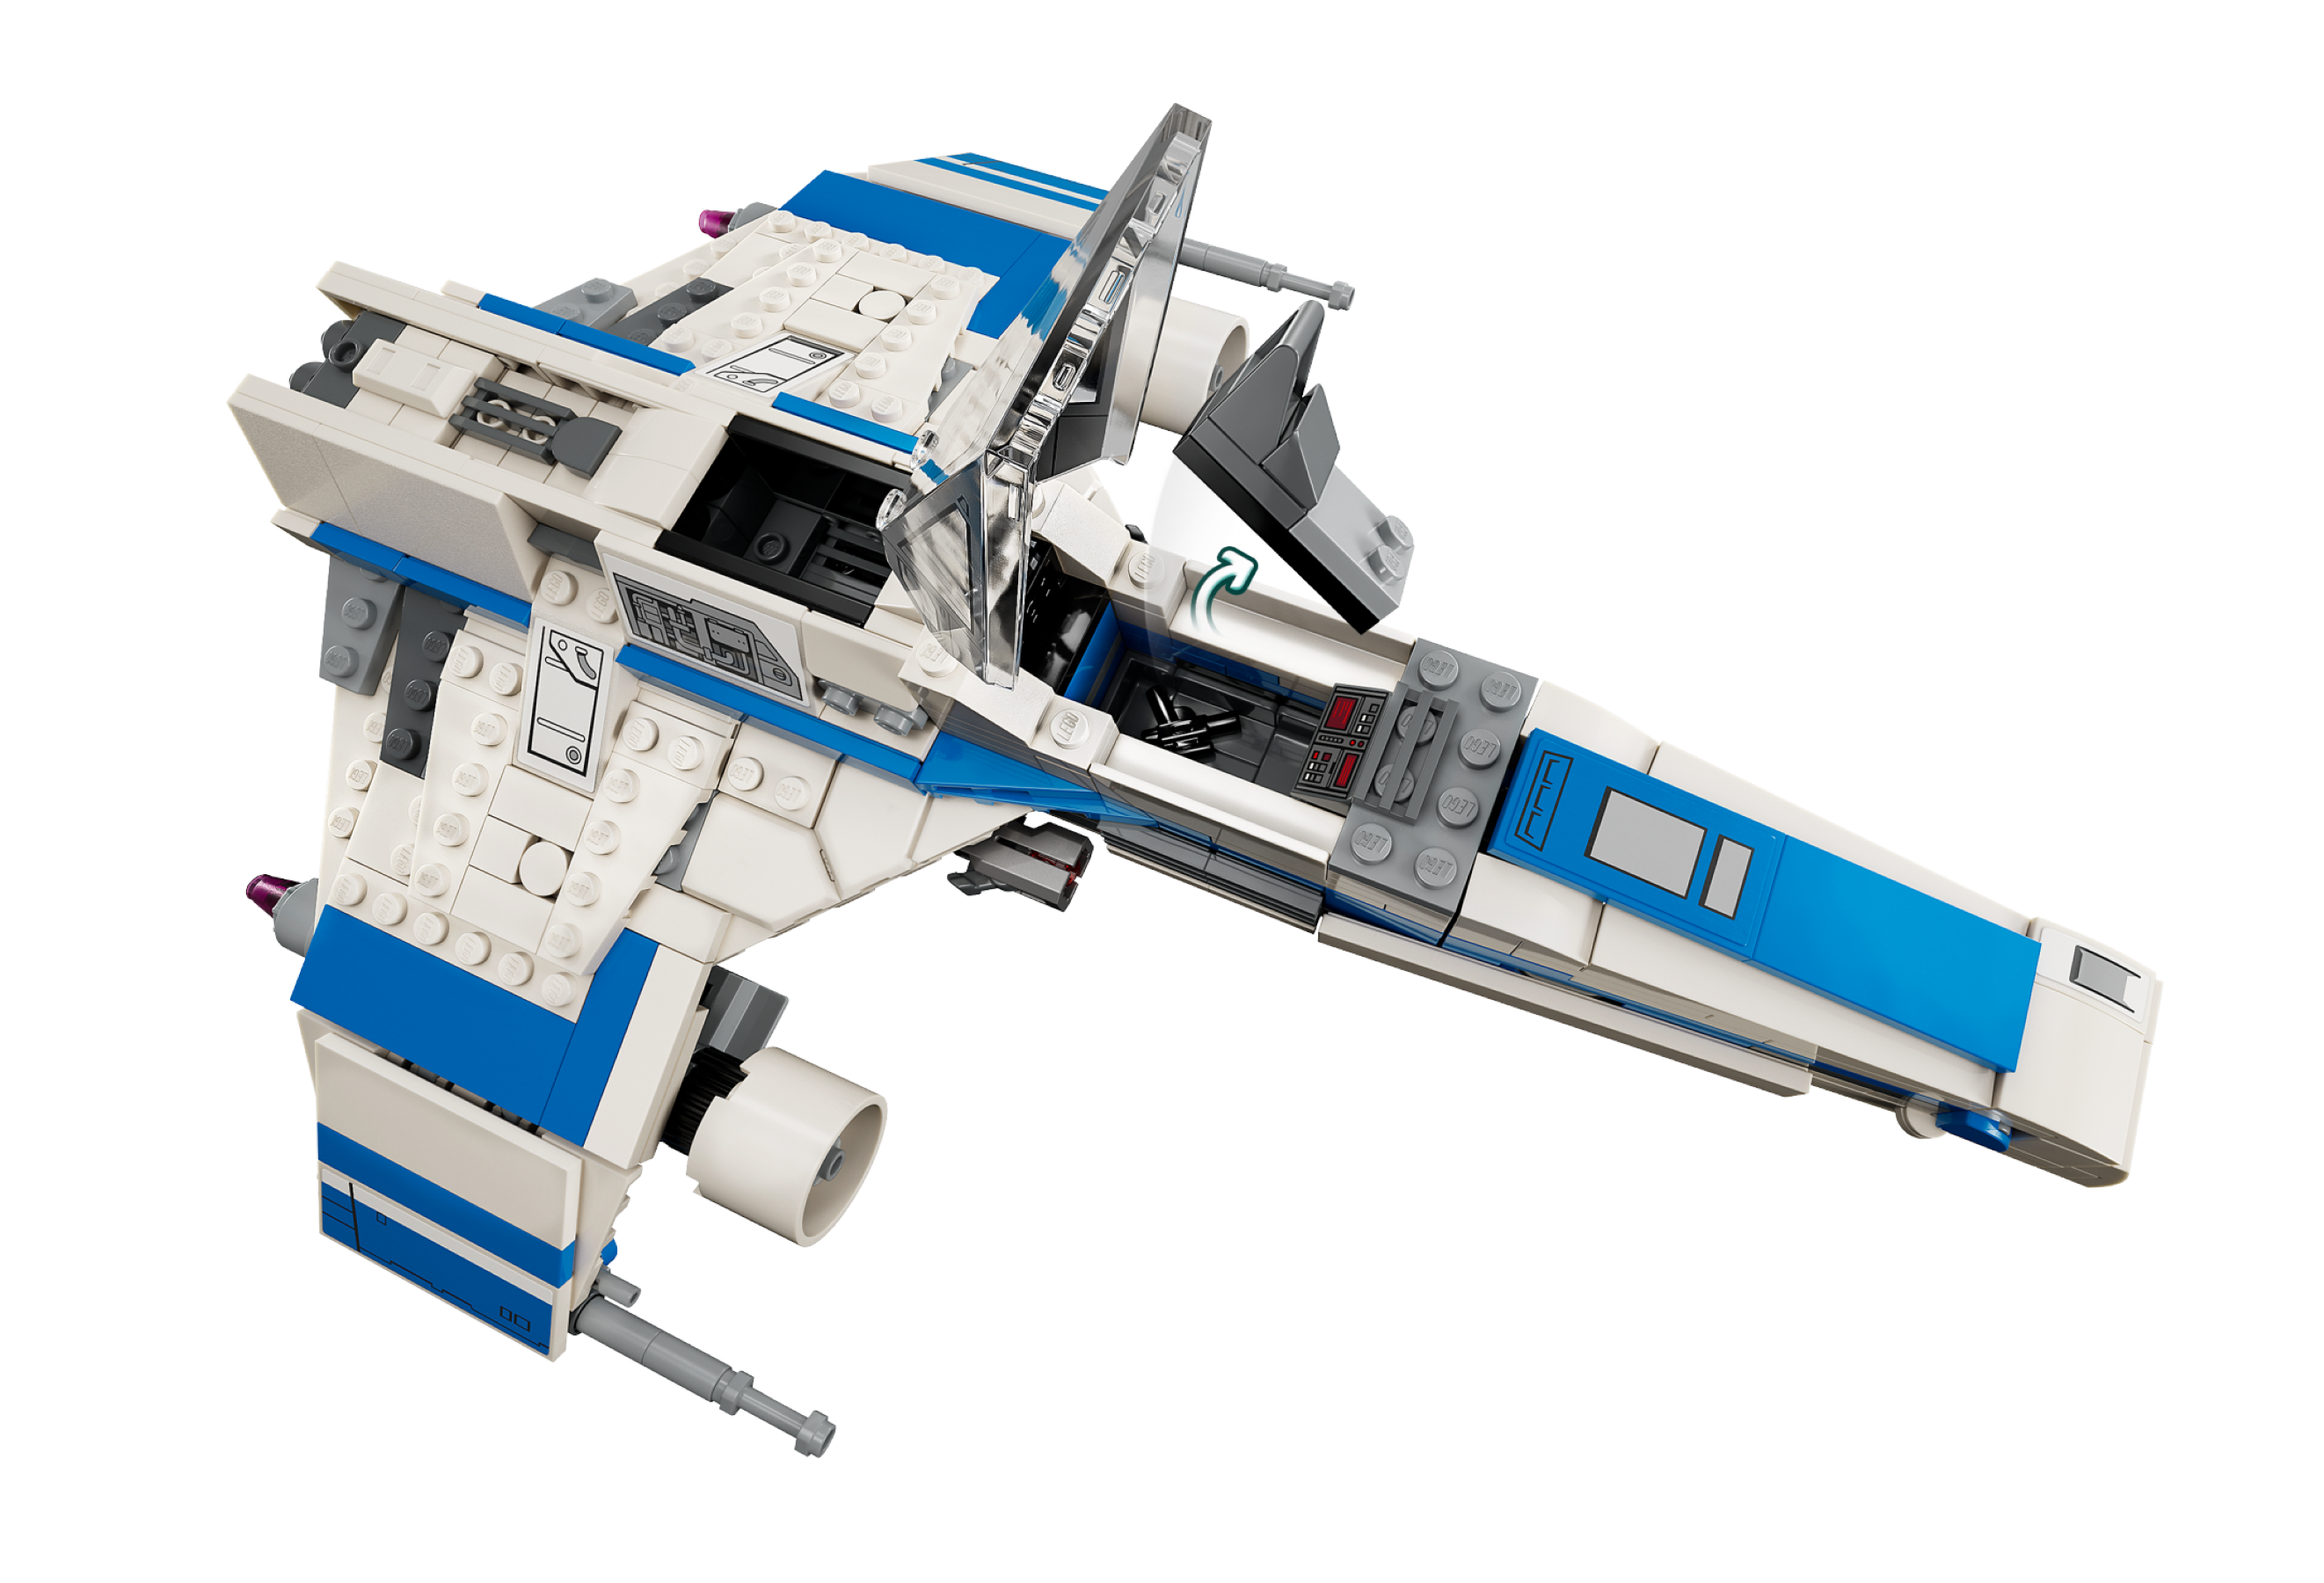 New Republic E-Wing™ vs. Shin Hati’s Starfighter™ 75364 | Star Wars™ | Buy  online at the Official LEGO® Shop US